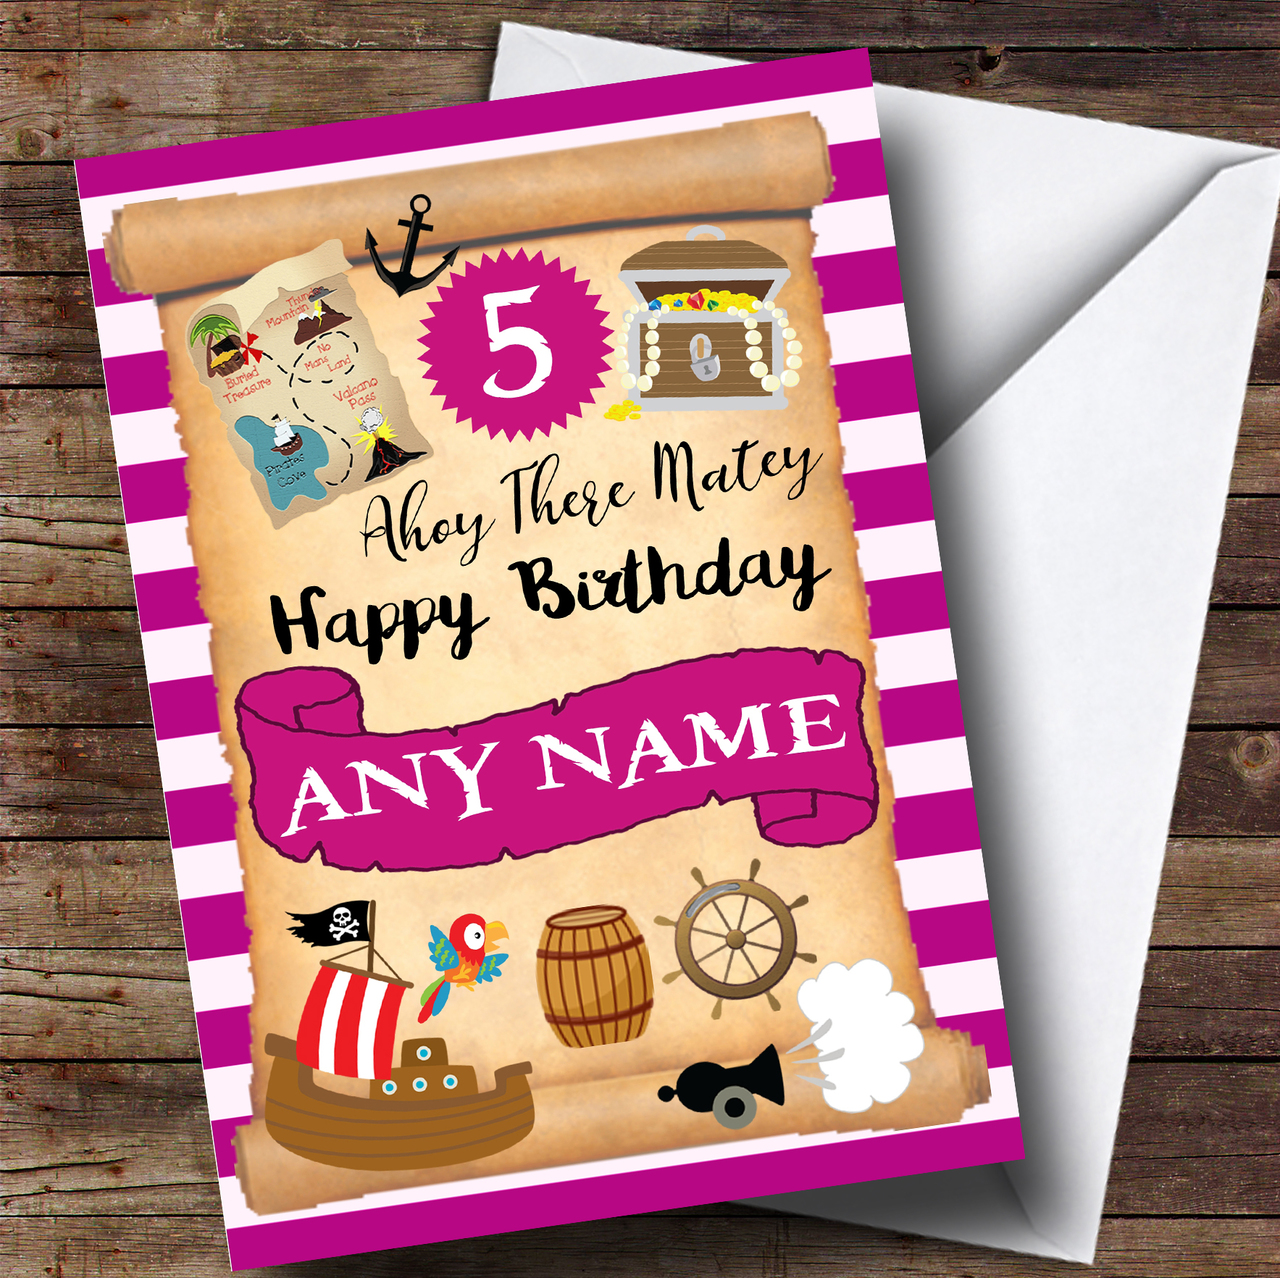 customized-birthday-cards-customized-birthday-card-by-juliecampbell-studio-calico-select